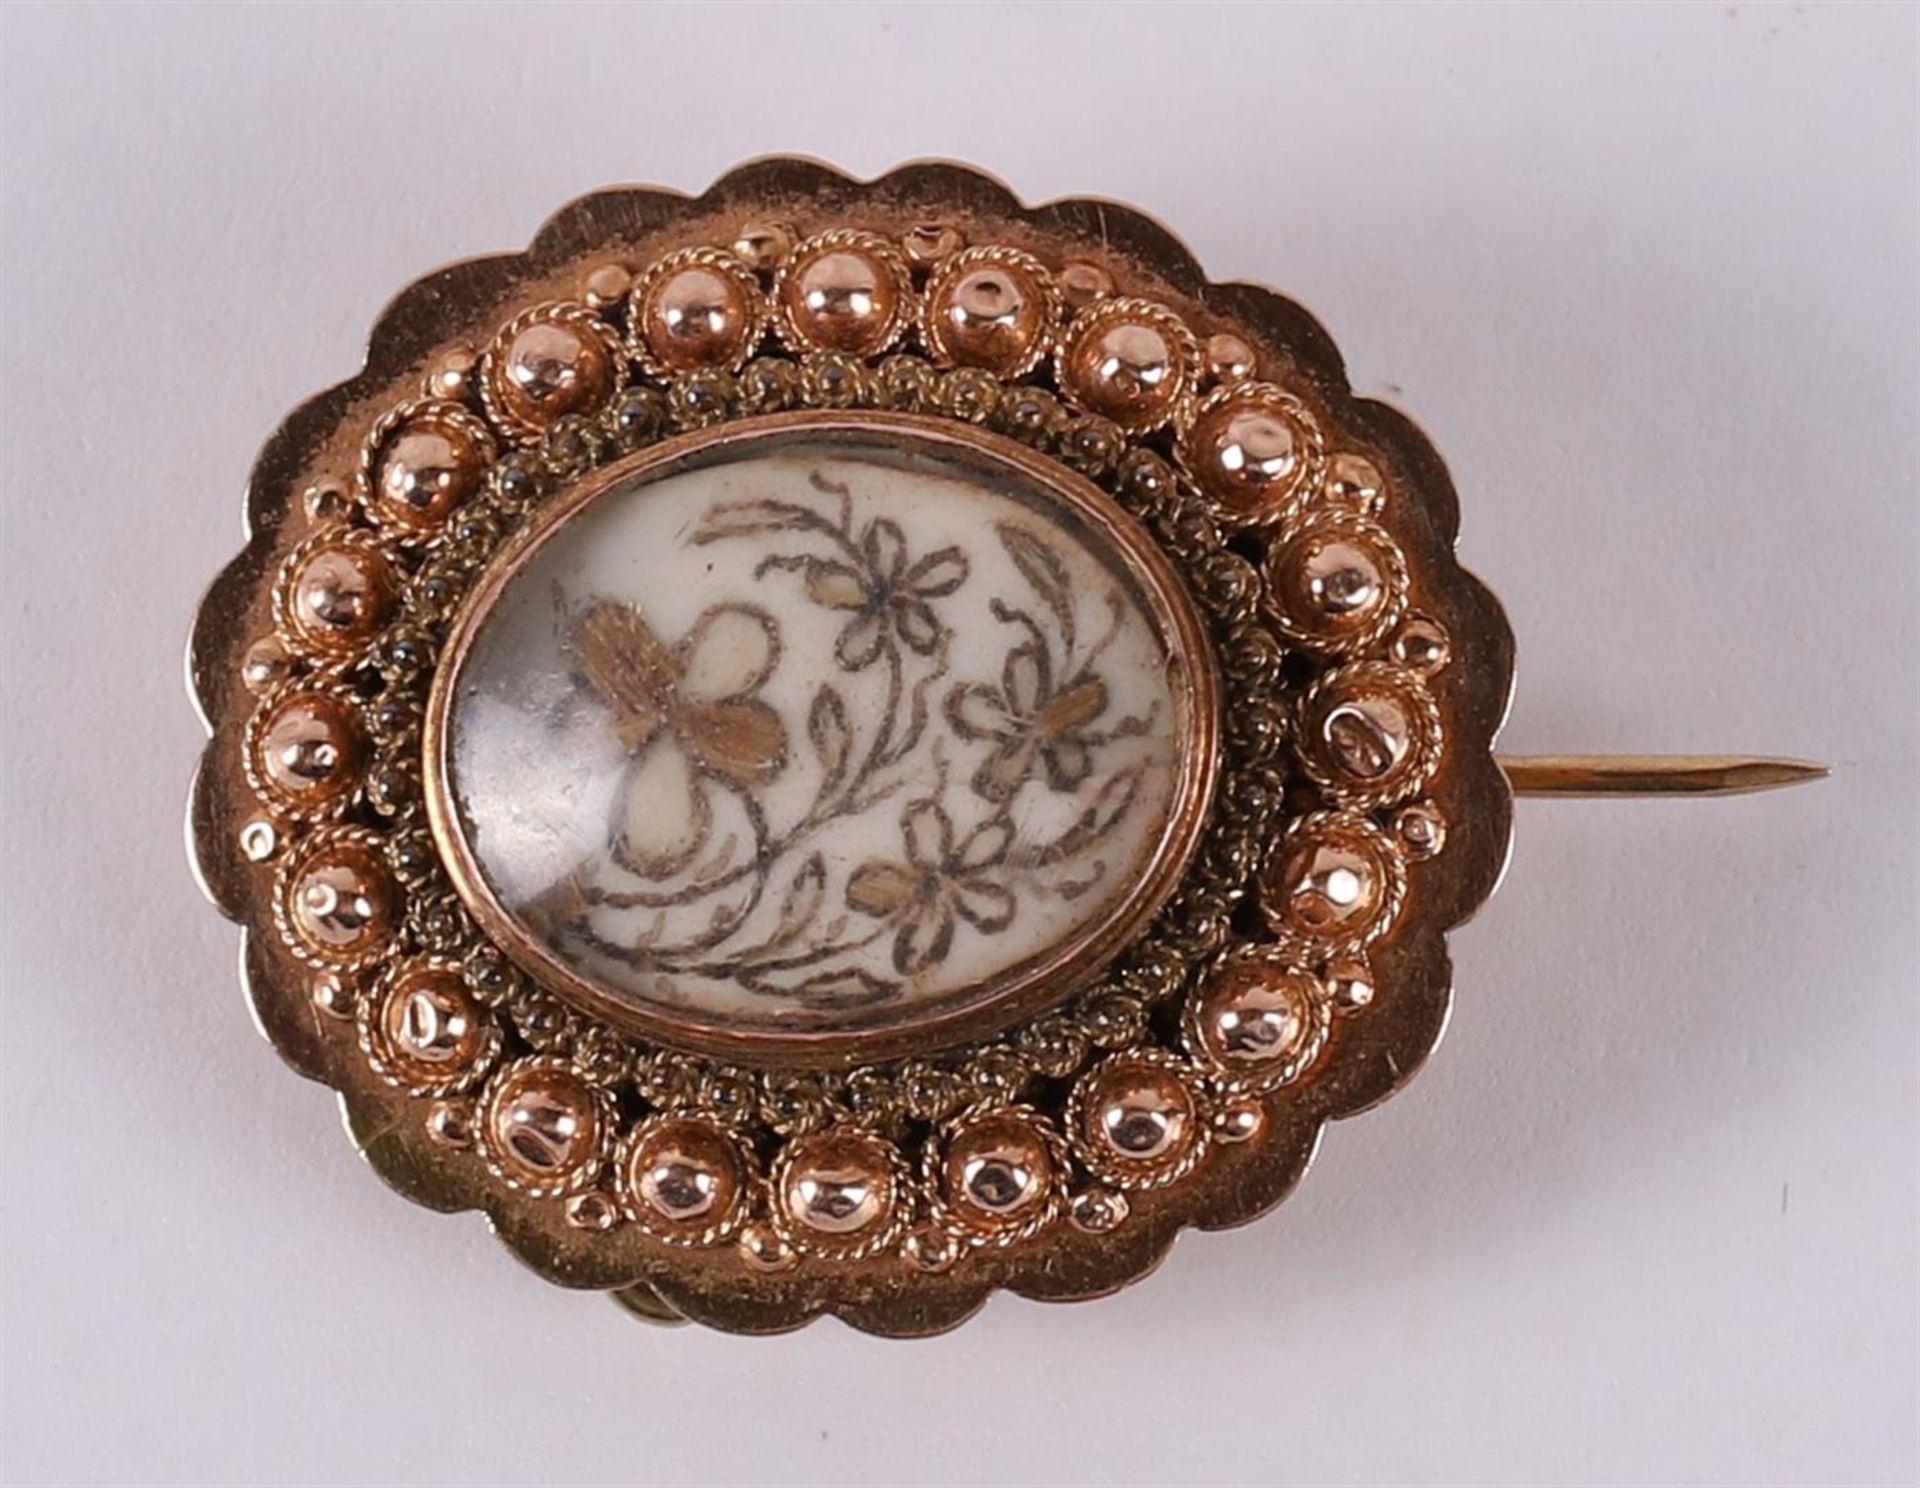 A 14 kt 585/1000 gold brooch with hairpiece, 19th century.